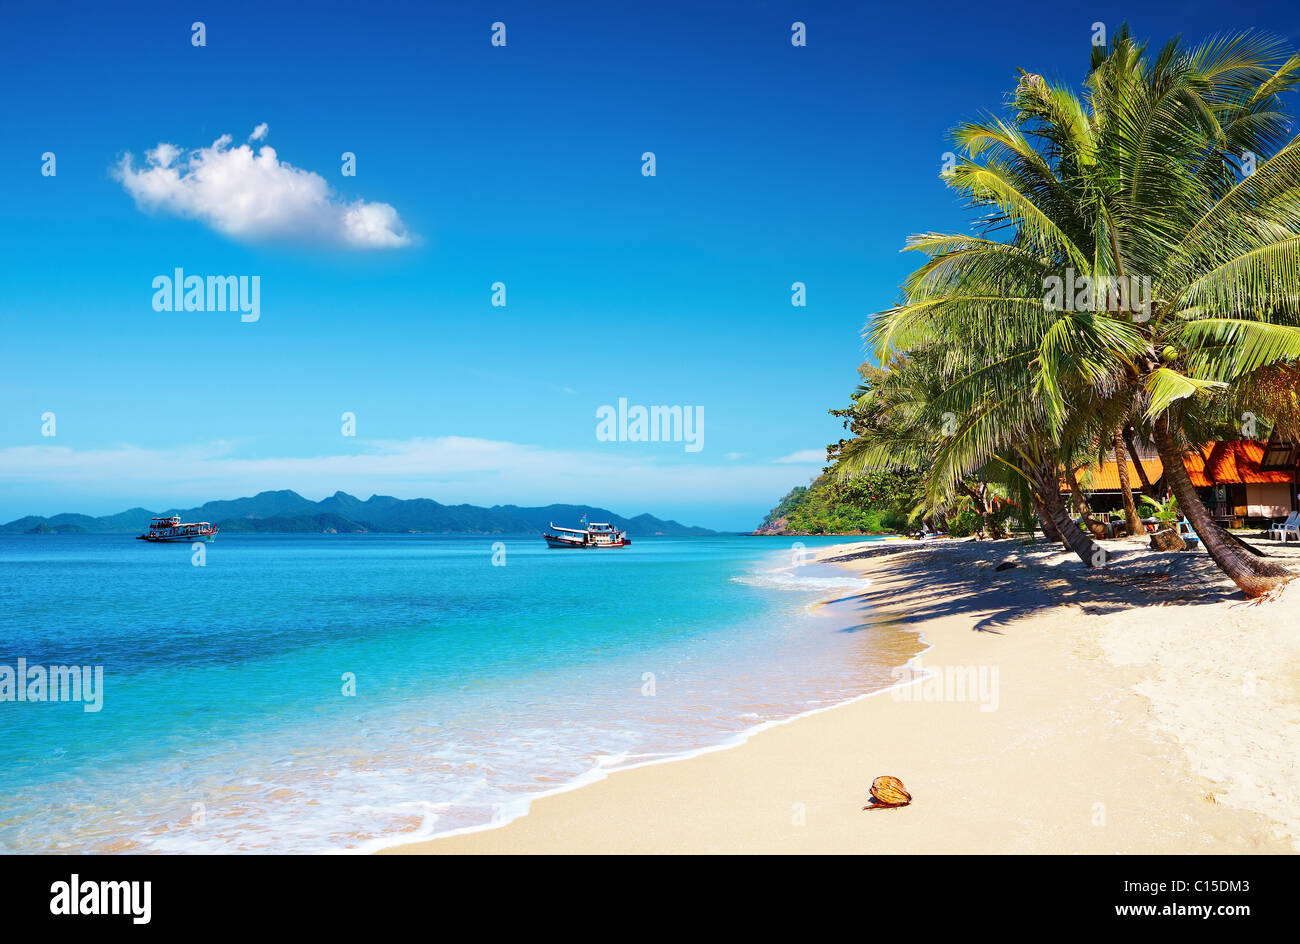 Tropical beach with coconut palms and bungalow, Thailand Stock Photo